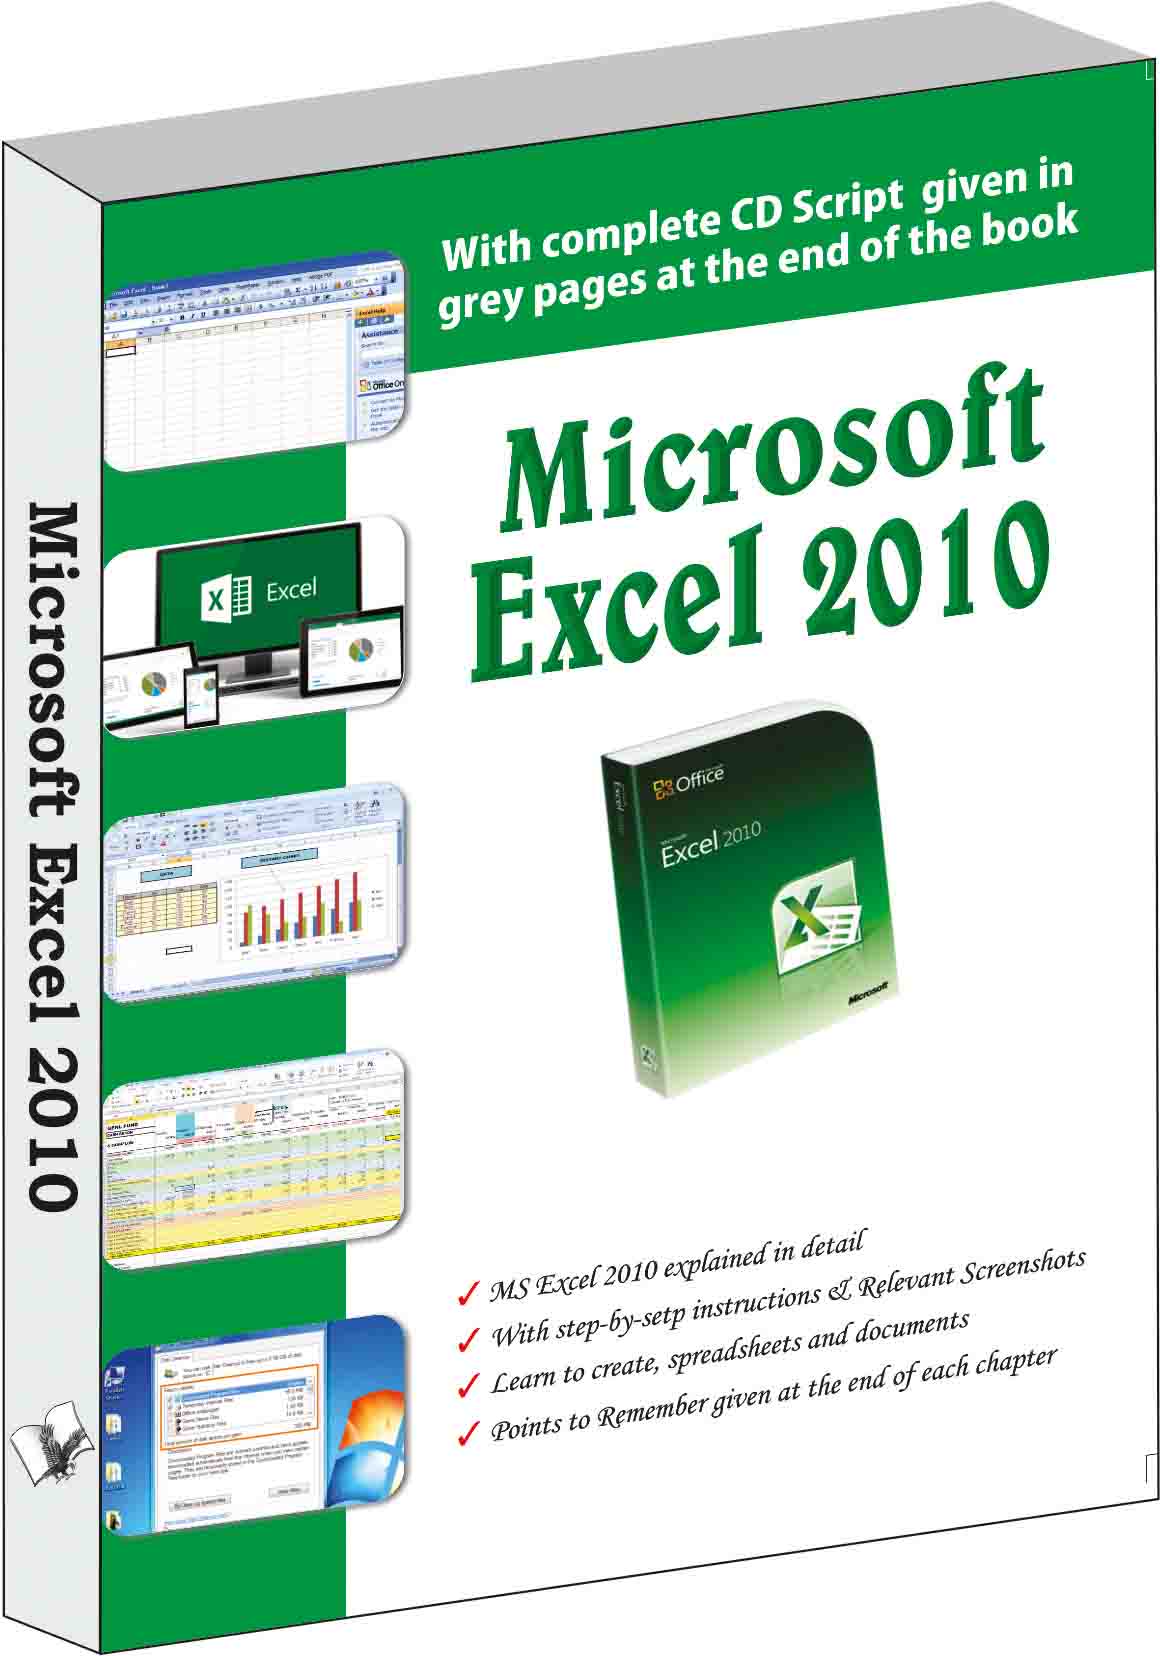 Microsoft Excel 2010 -Develop computer skills: be future ready